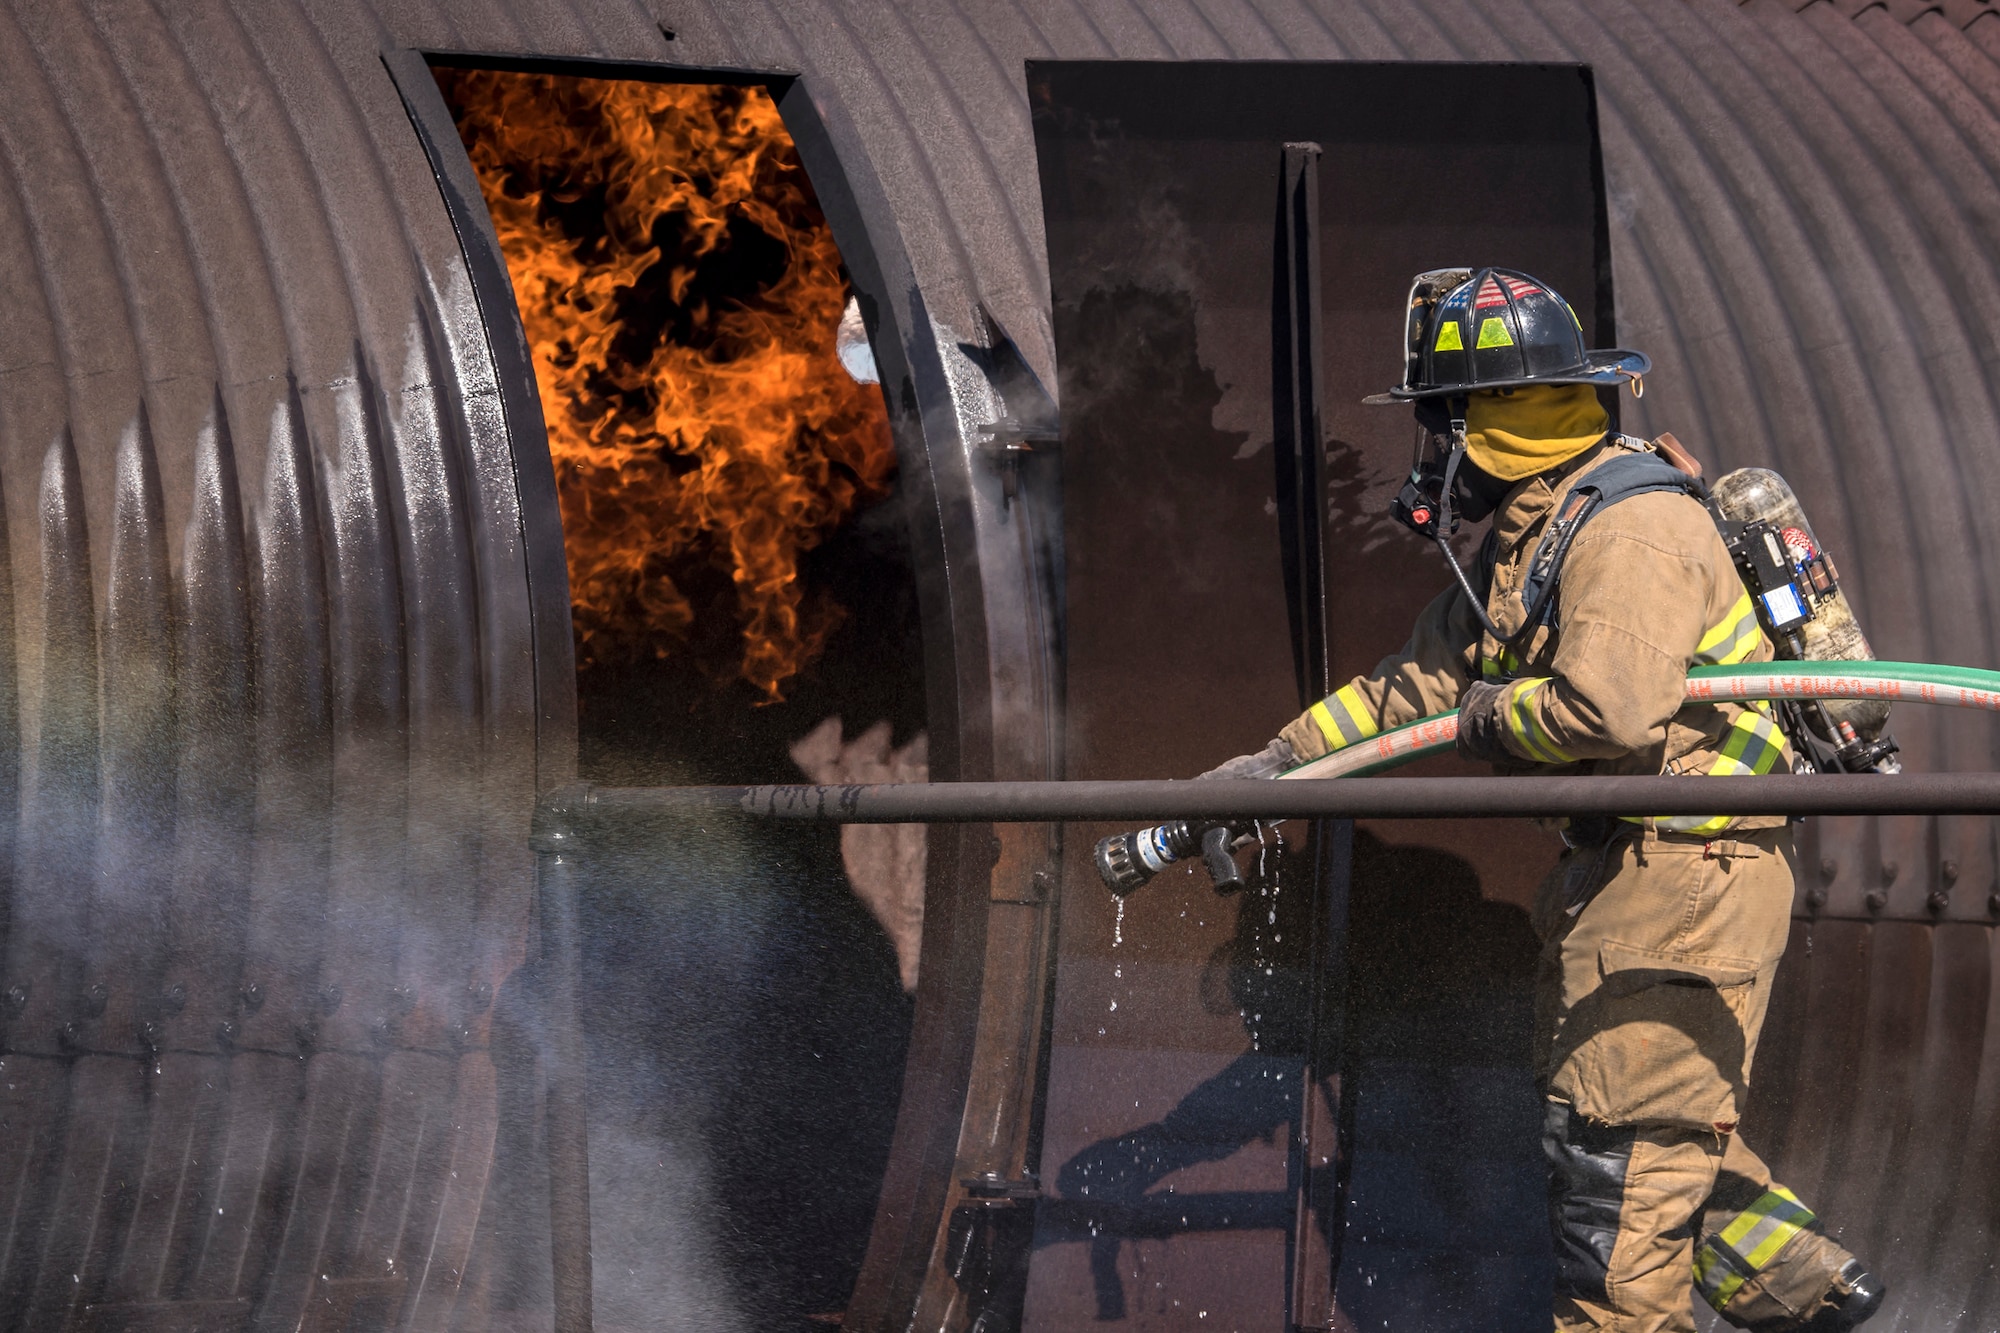 A firefighter from the Valdosta Fire Department (VFD) enters a simulated aircraft during live-fire training, April 25, 2018, at Moody Air Force Base, Ga. Firefighters from the 23d Civil Engineer Squadron and VFD participated in the training to gain more experience fighting aircraft fires and to work together as a cohesive team while still practicing proper and safe firefighting techniques. (U.S. Air Force photo by Airman Eugene Oliver)